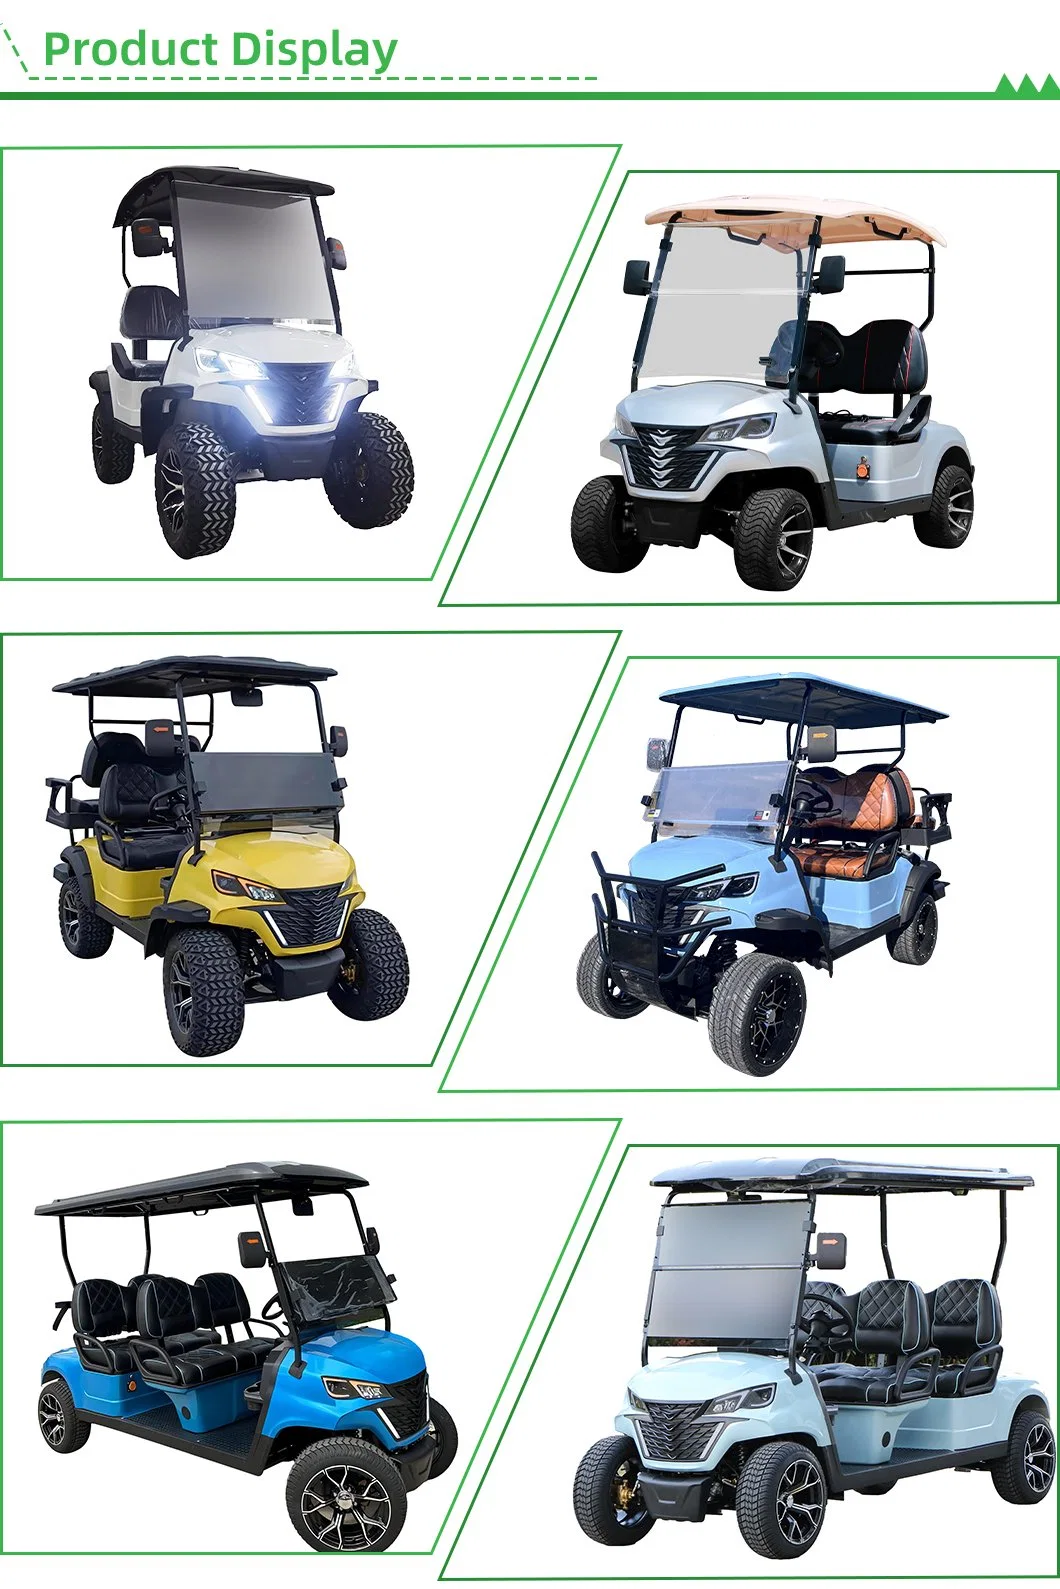 New OEM Utility Sightseeing Carts off Road Lift 6 Seats Electric Golf Cart